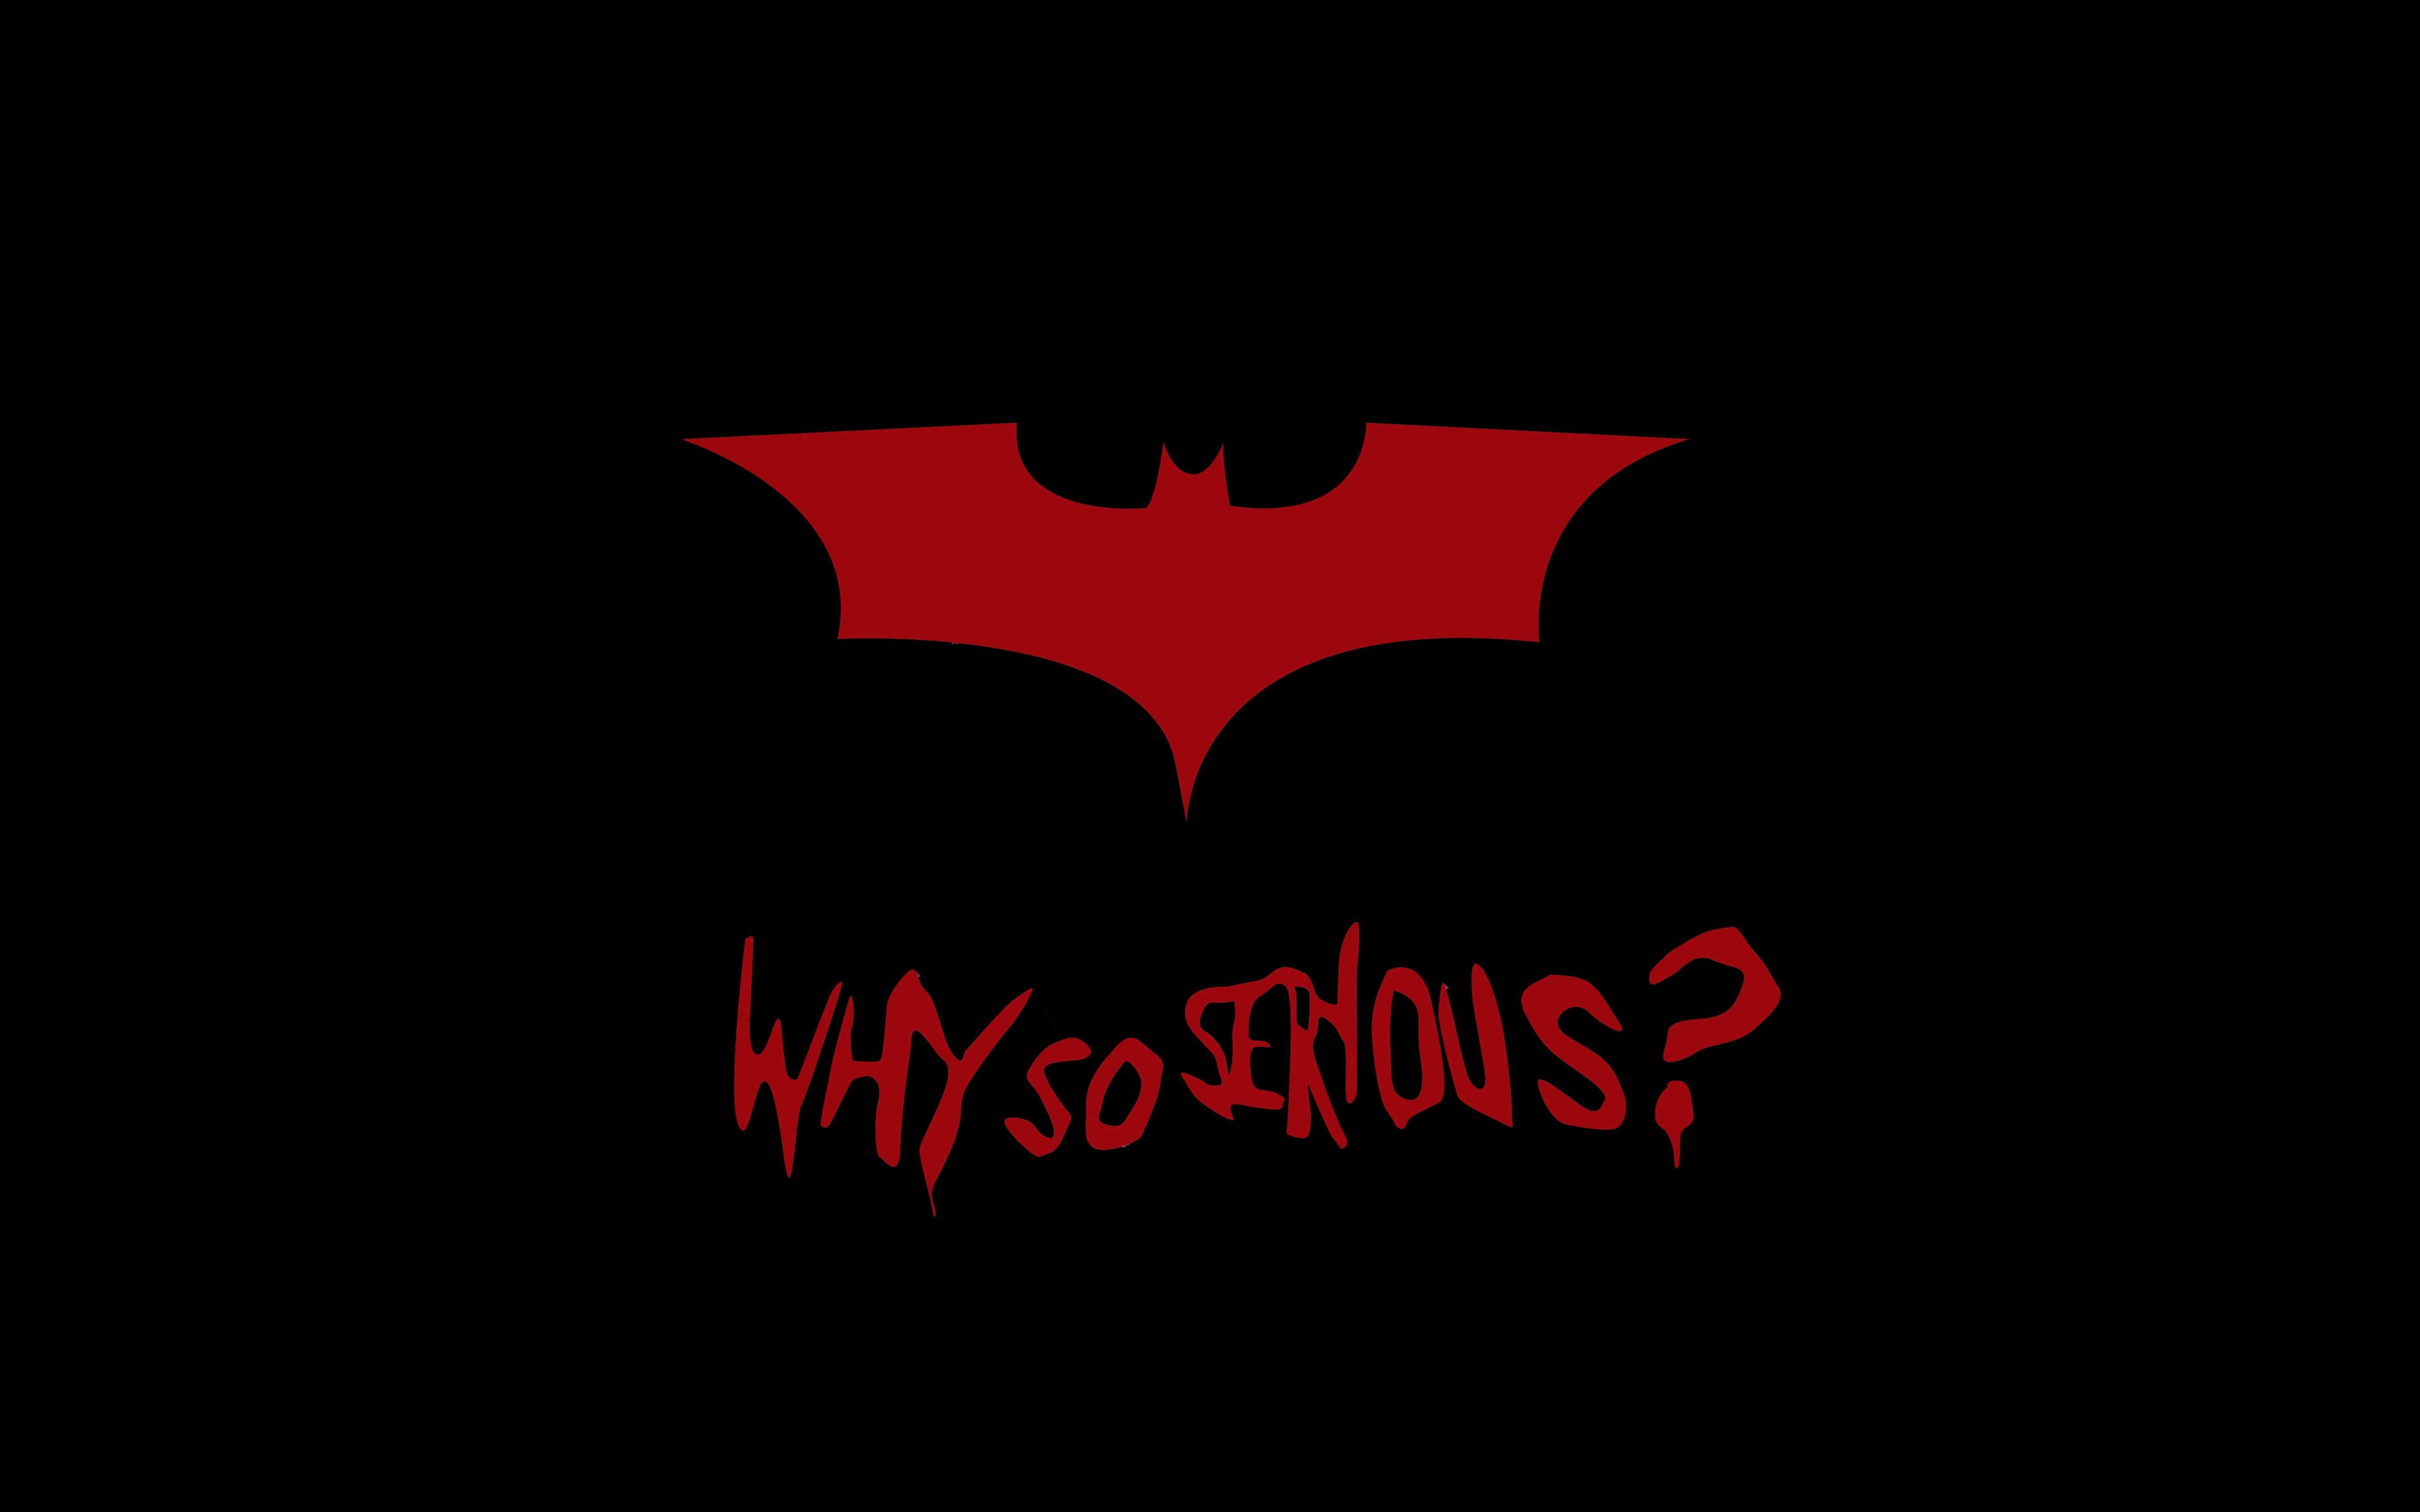 Free download Why So Serious Joker Batman Cool Logo 1317 Wallpapers and  Free [3840x2400] for your Desktop, Mobile & Tablet | Explore 26+ Cool Logos  Wallpapers | Wallpaper Of Logos, Superman Logos